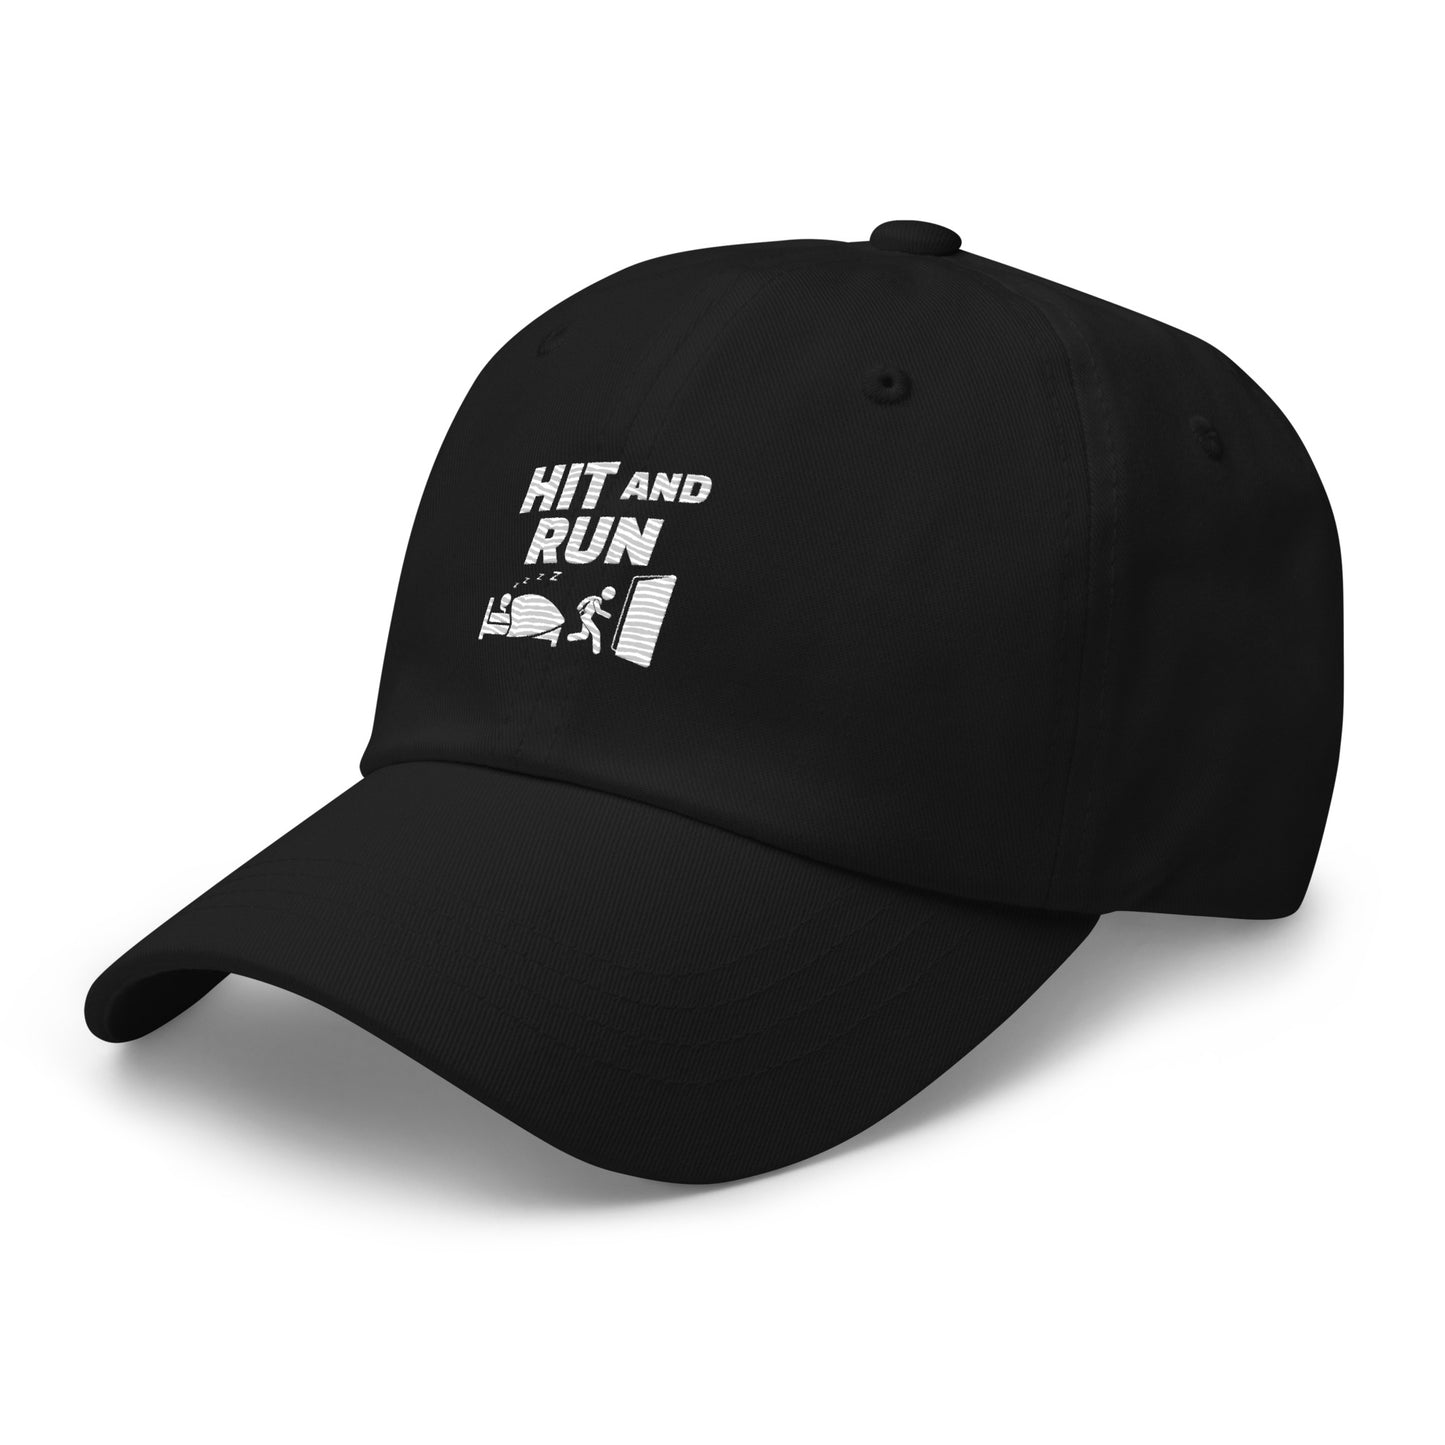 Hit And Run Dad hat